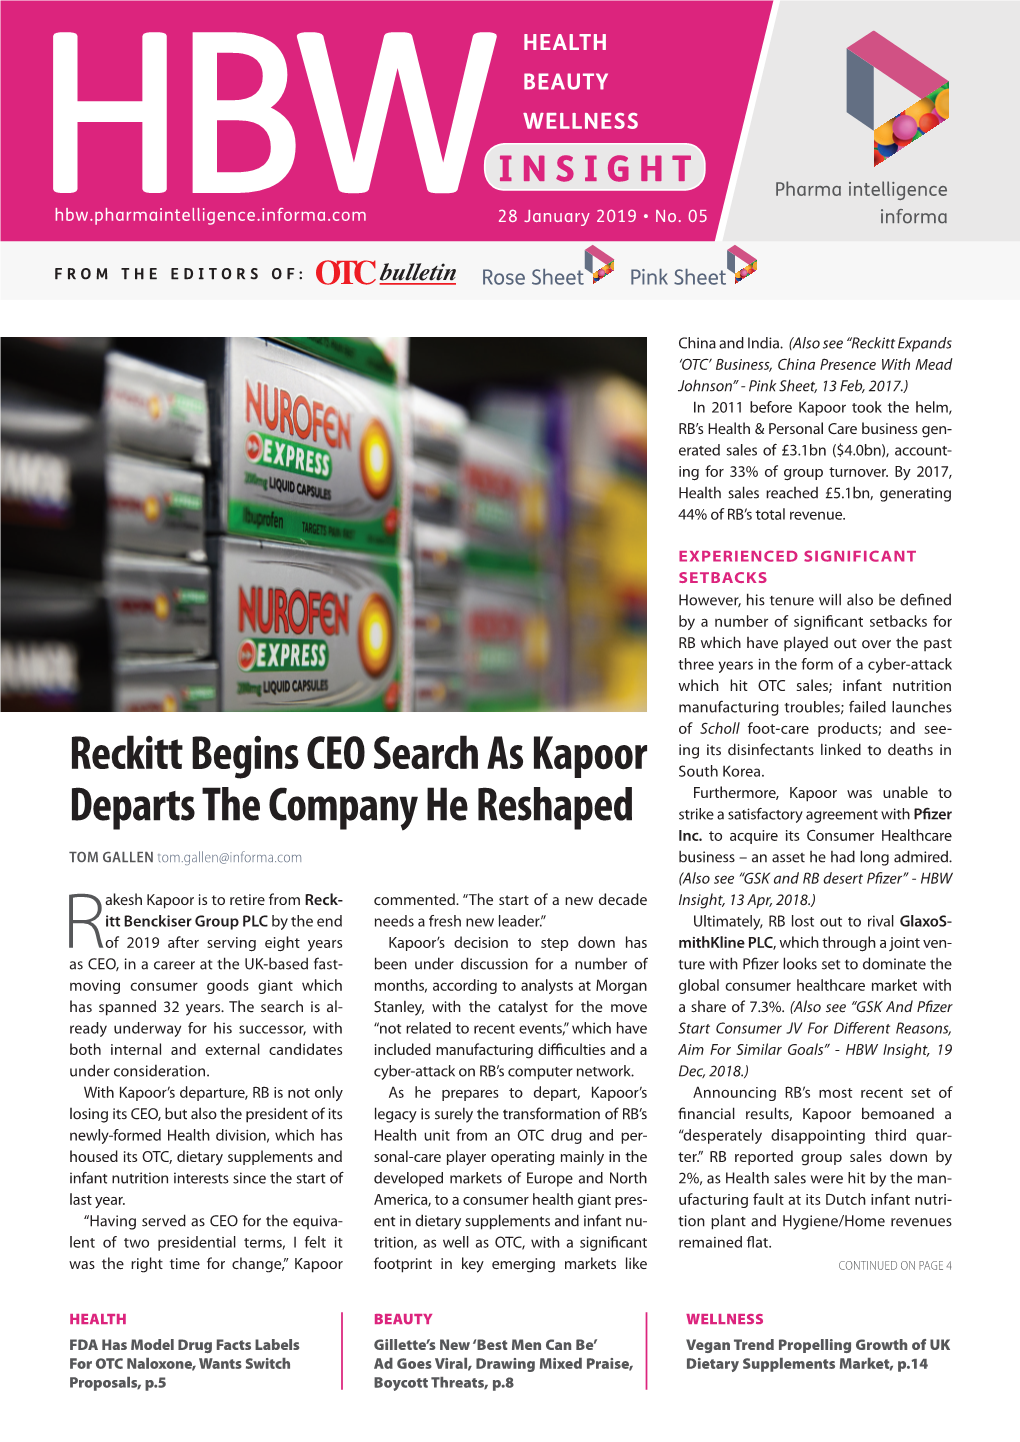 Reckitt Begins CEO Search As Kapoor Departs the Company He Reshaped